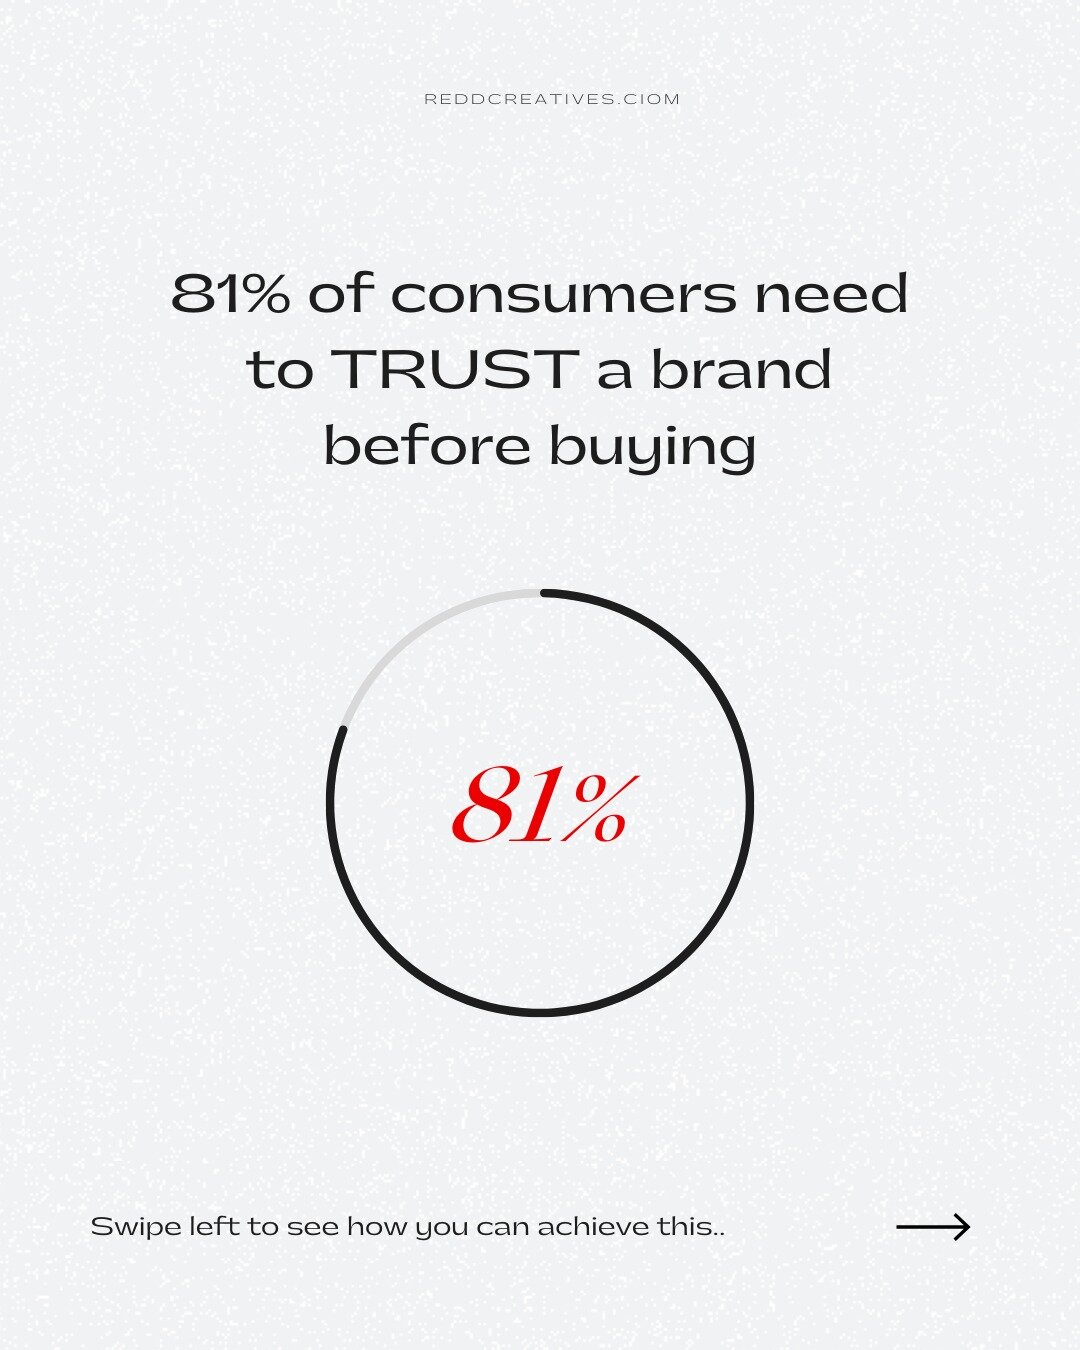 Have you ever bought something from a brand that you didn&rsquo;t trust? 

I&rsquo;m guessing no. 

So, if you don&rsquo;t build trust and credibility among your audience, you could lose out on that opportunity.

.
.
.
.
.
.
#localbusinesses #webdesi